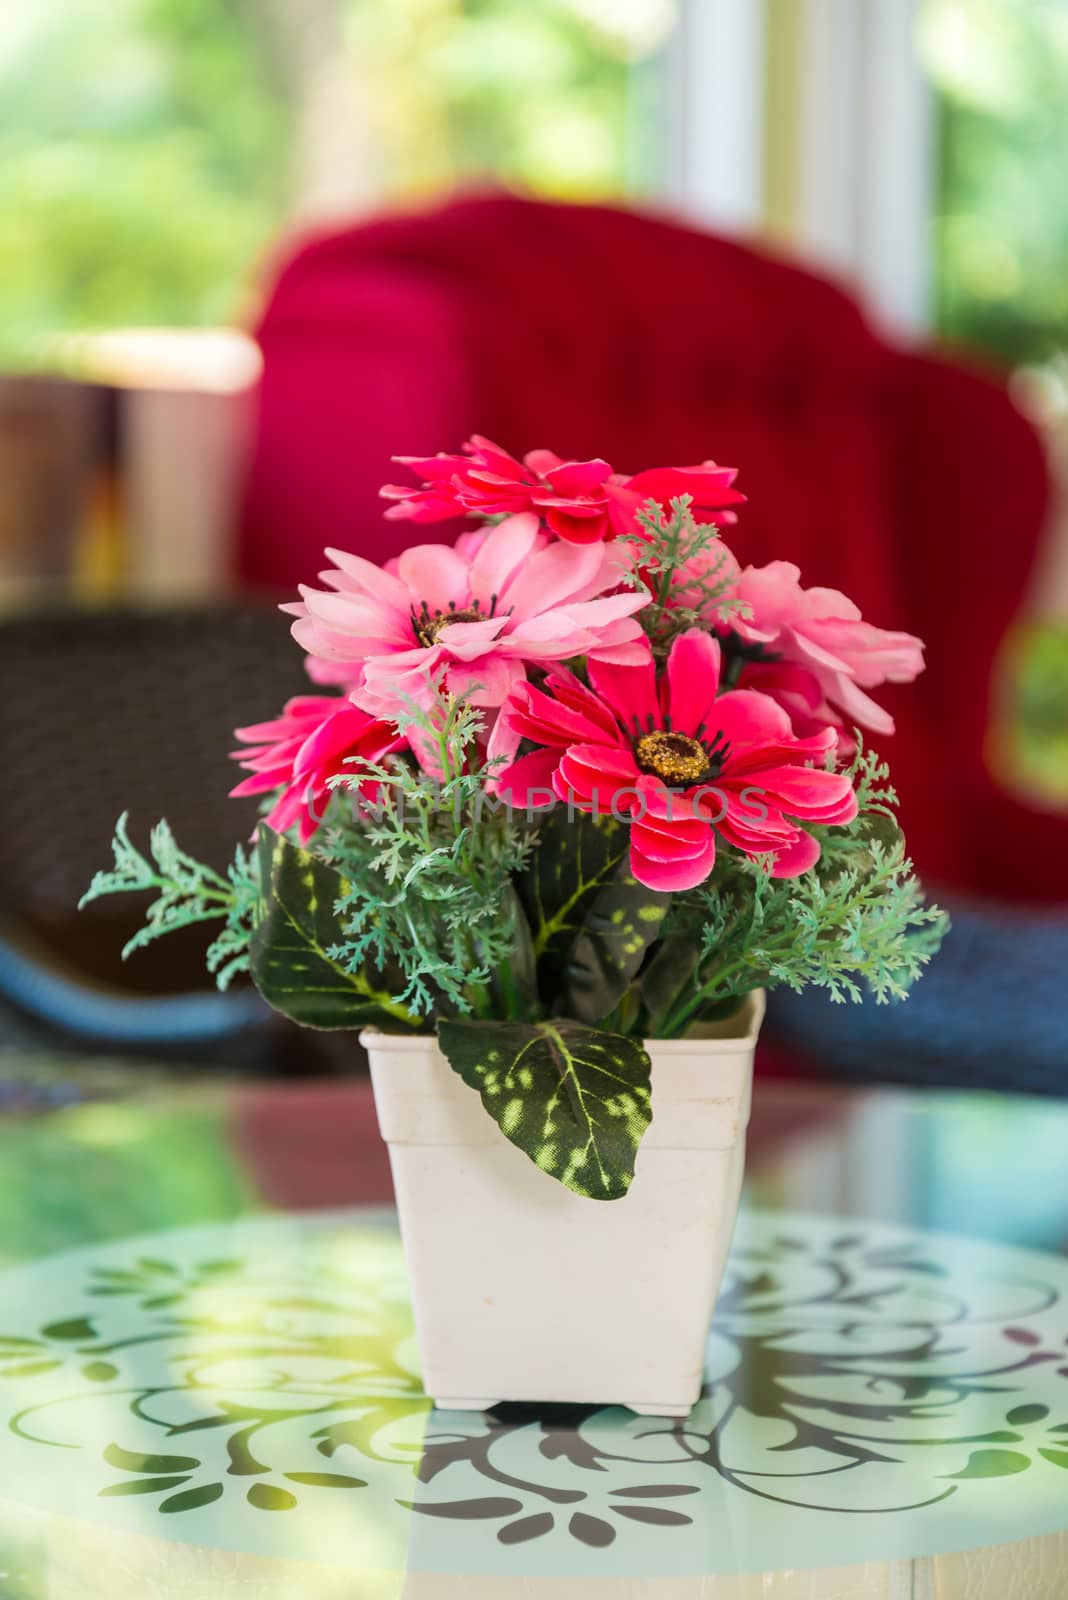 Flowers used to decorate on a table